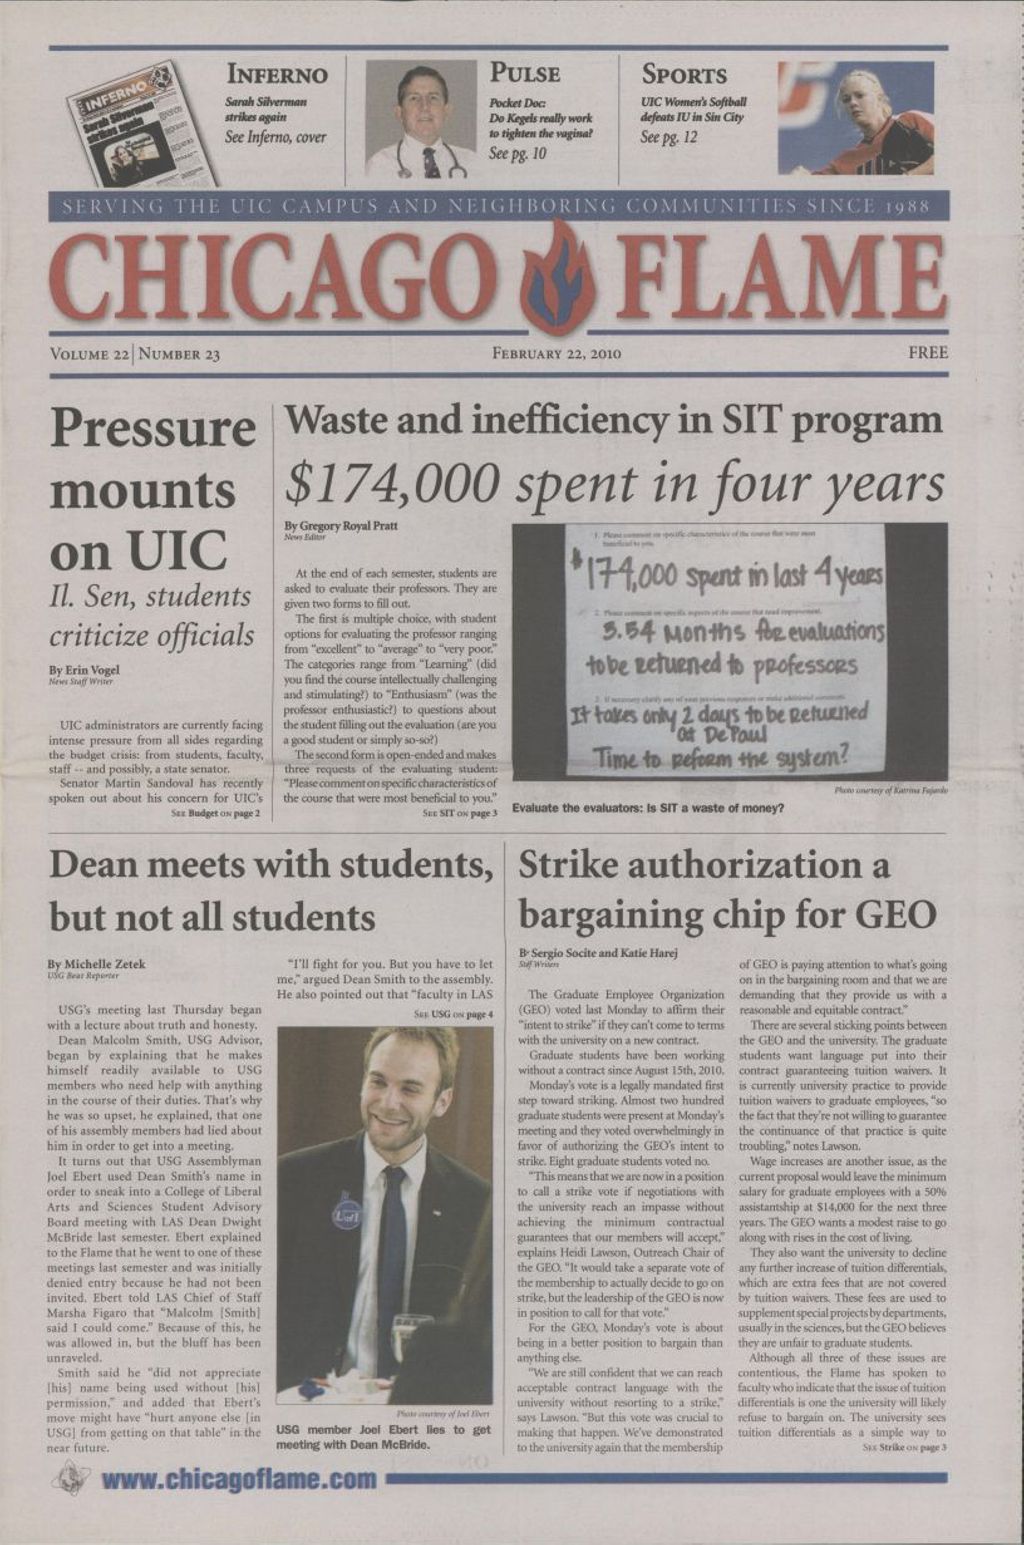 Miniature of Chicago Flame (February 22, 2010)